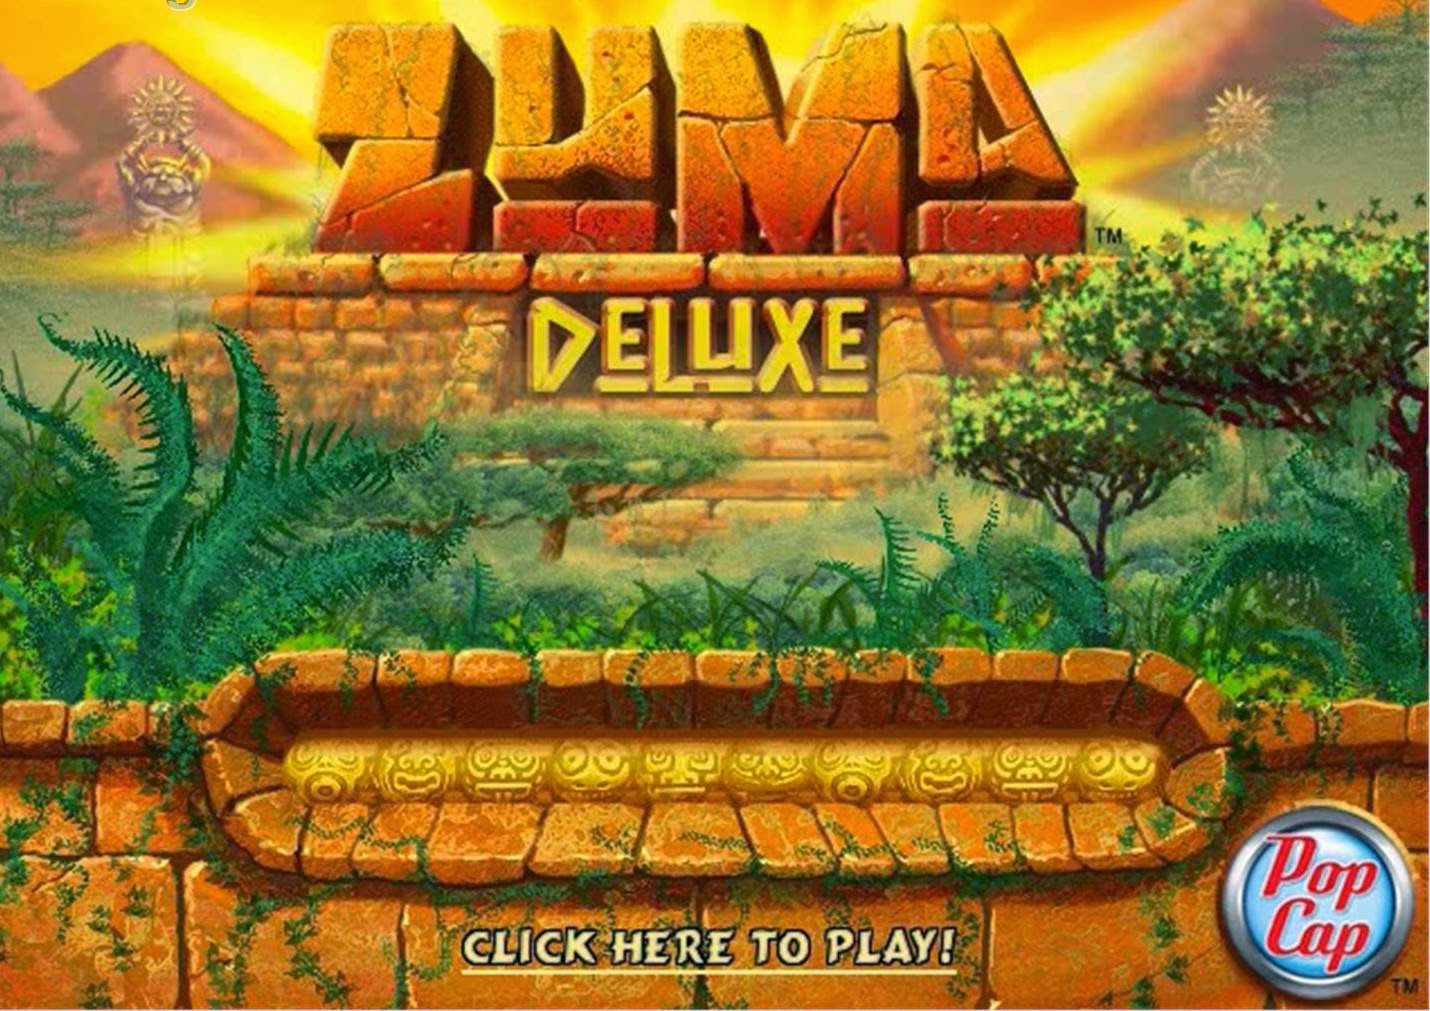 Zuma Deluxe PC Game Free Download Full Version - Free ...